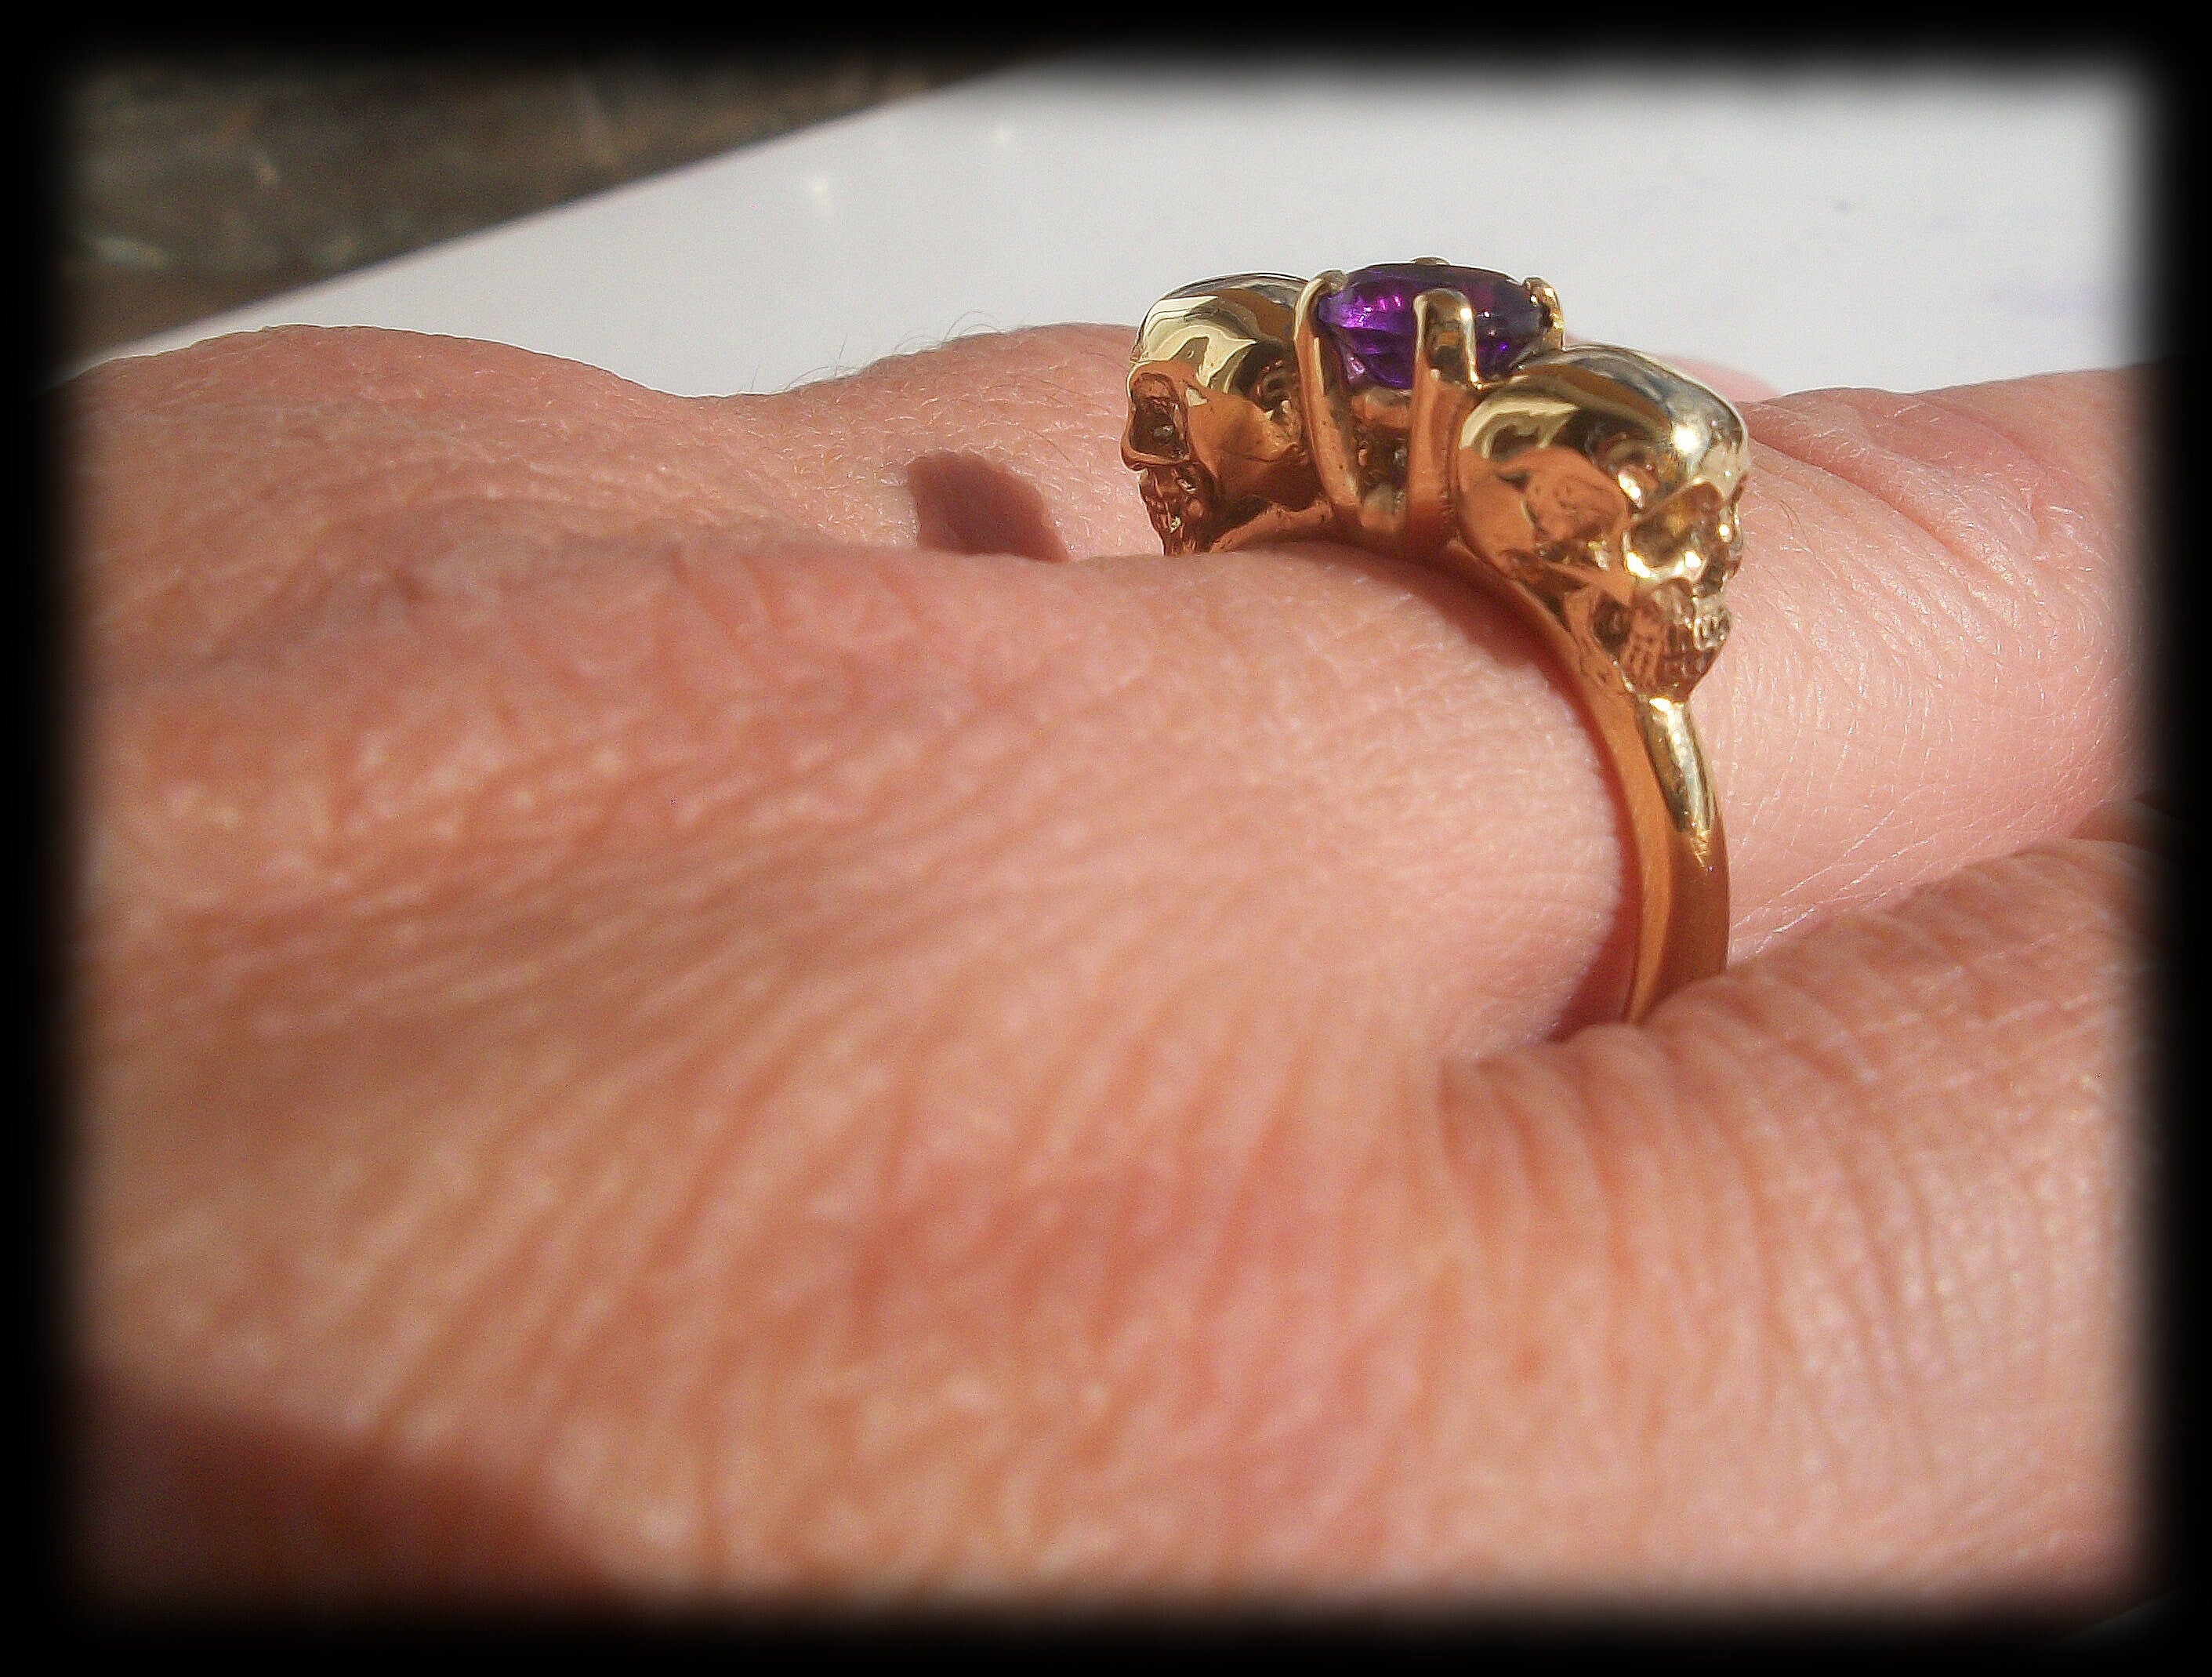 Skull ring - 18K Solid Gold Dark Gothic Skull Engagement Ring with Amethyst - Love to Death Ring Inspired by Lovers Of Valdaro